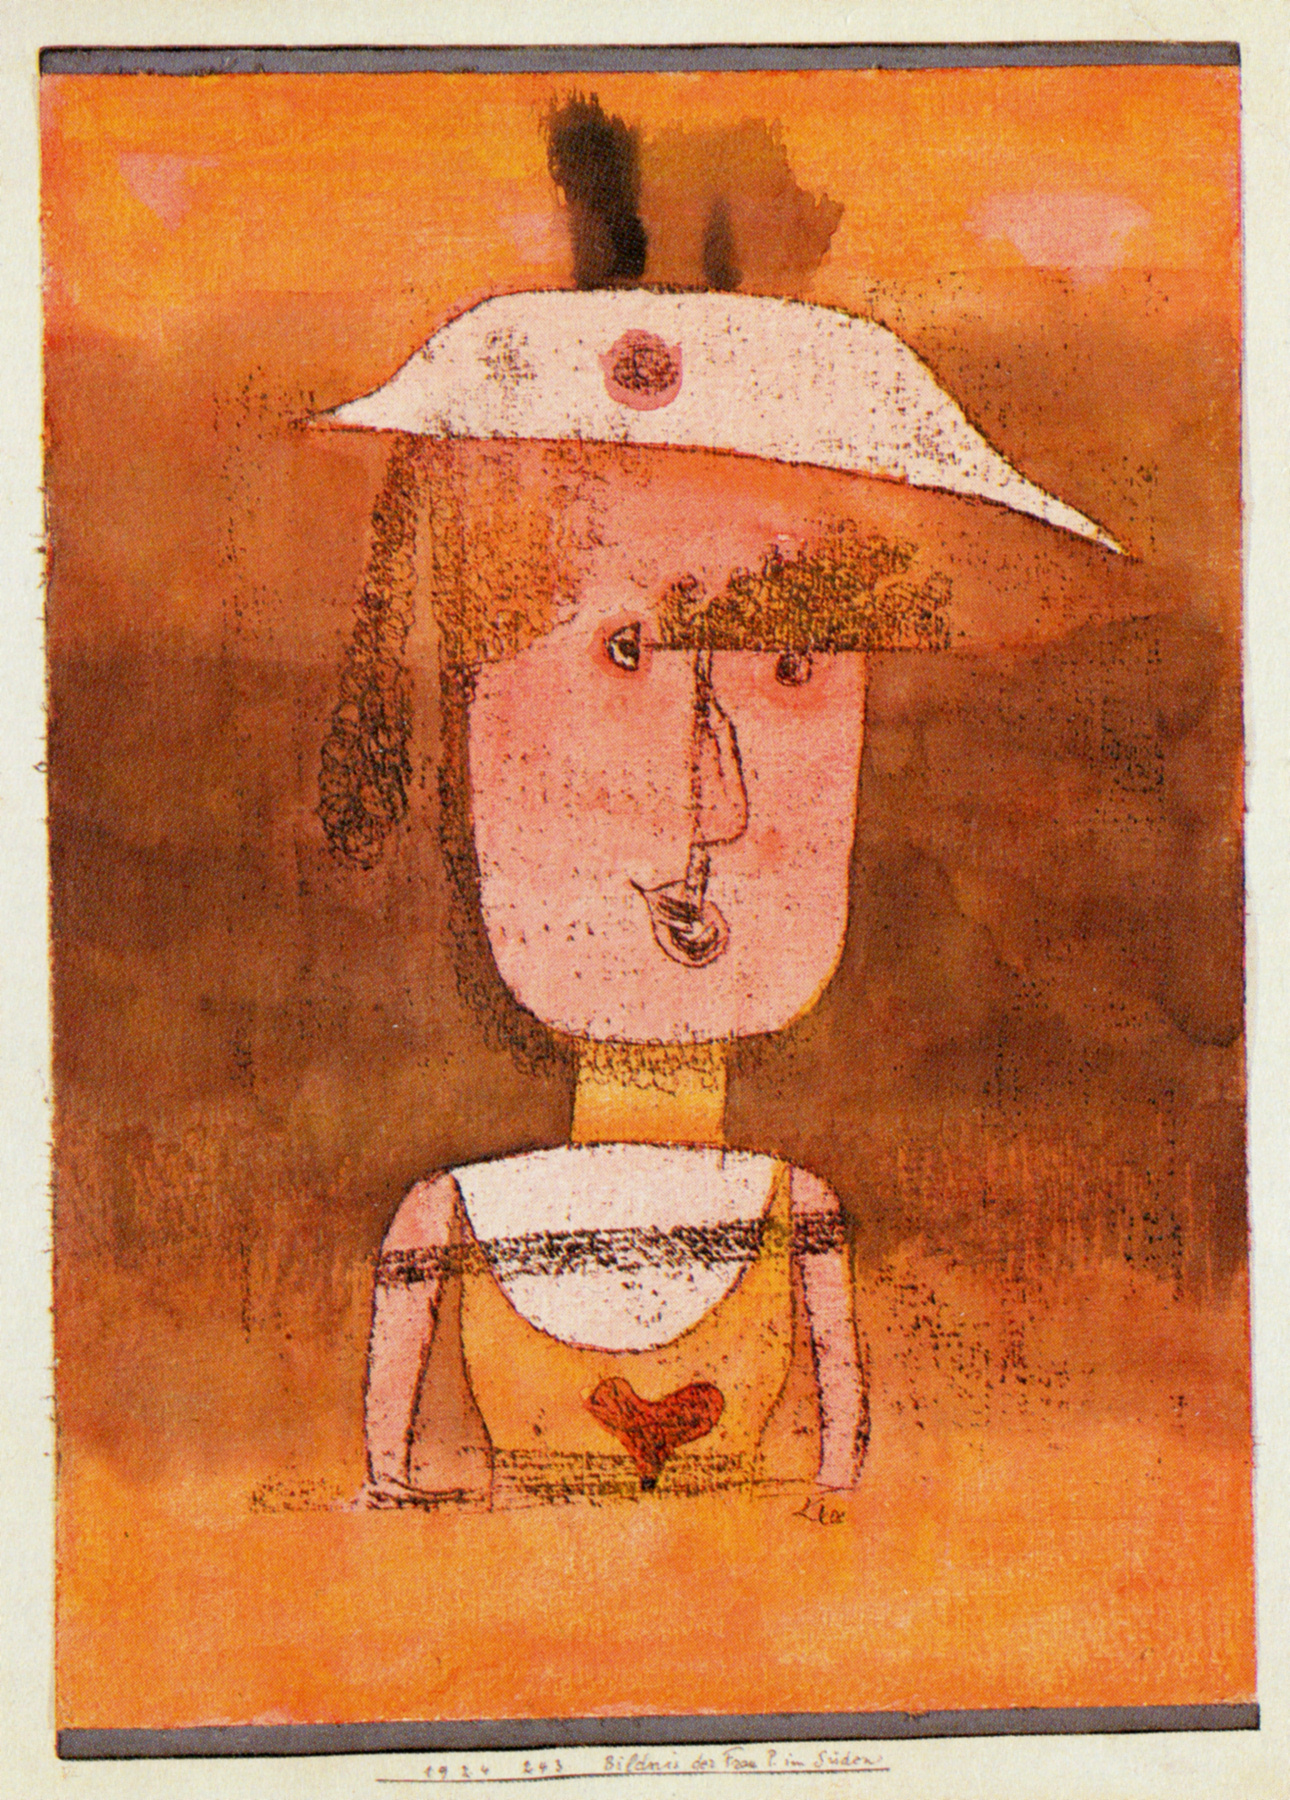 Portrait of Mrs P. in the South by Paul Klee - 1924 - 37.6 × 27.4 cm Solomon R. Guggenheim Museum